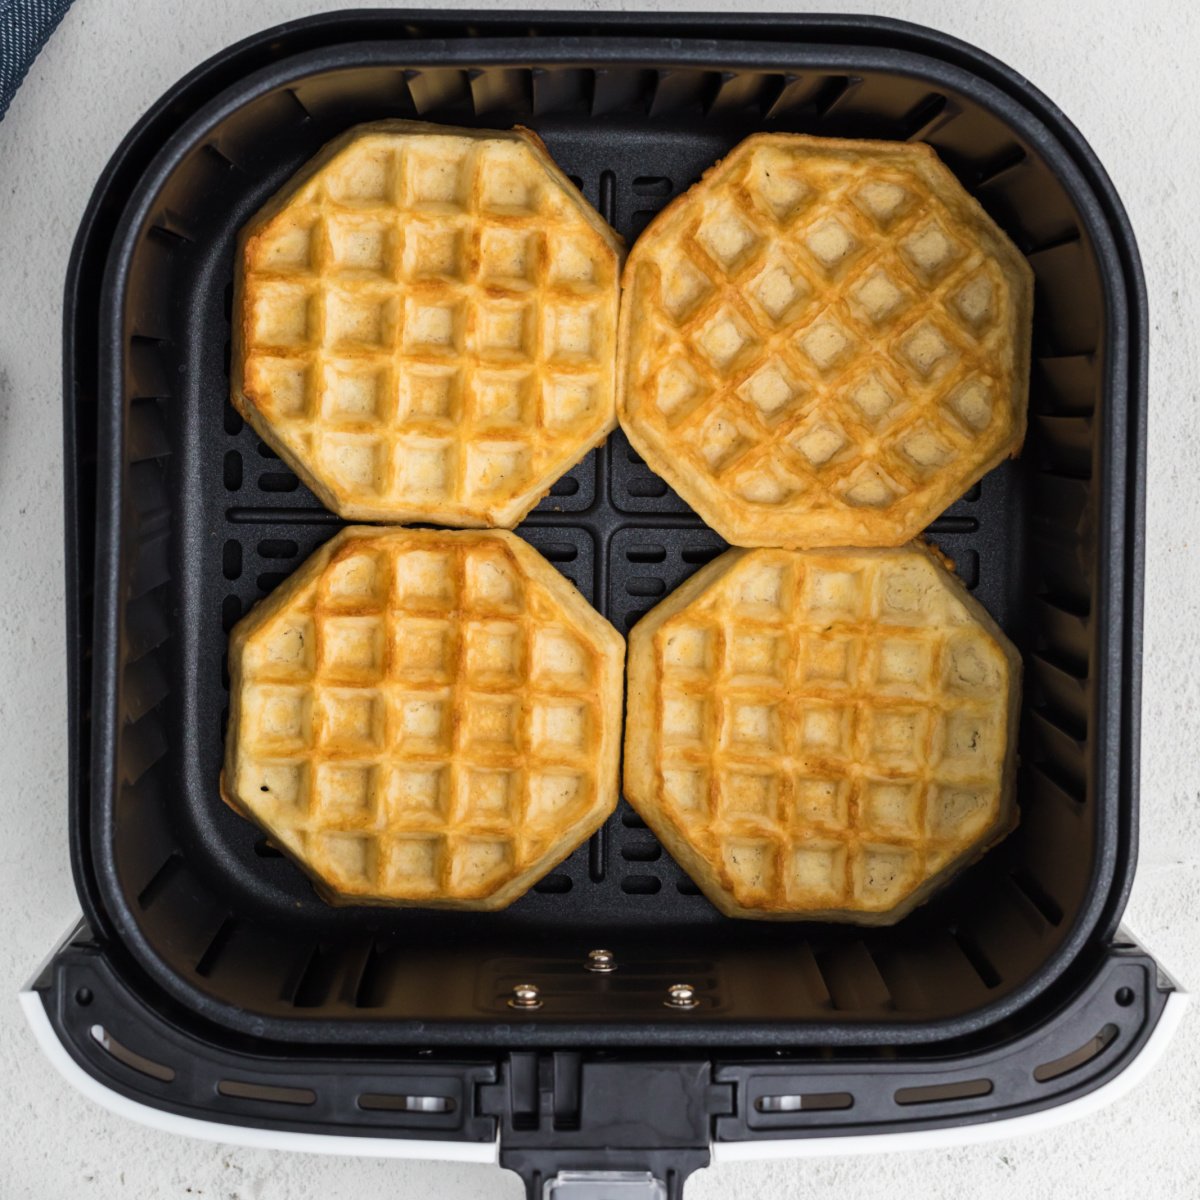 Fully cooked frozen waffles in air fryer basket in a single layer.